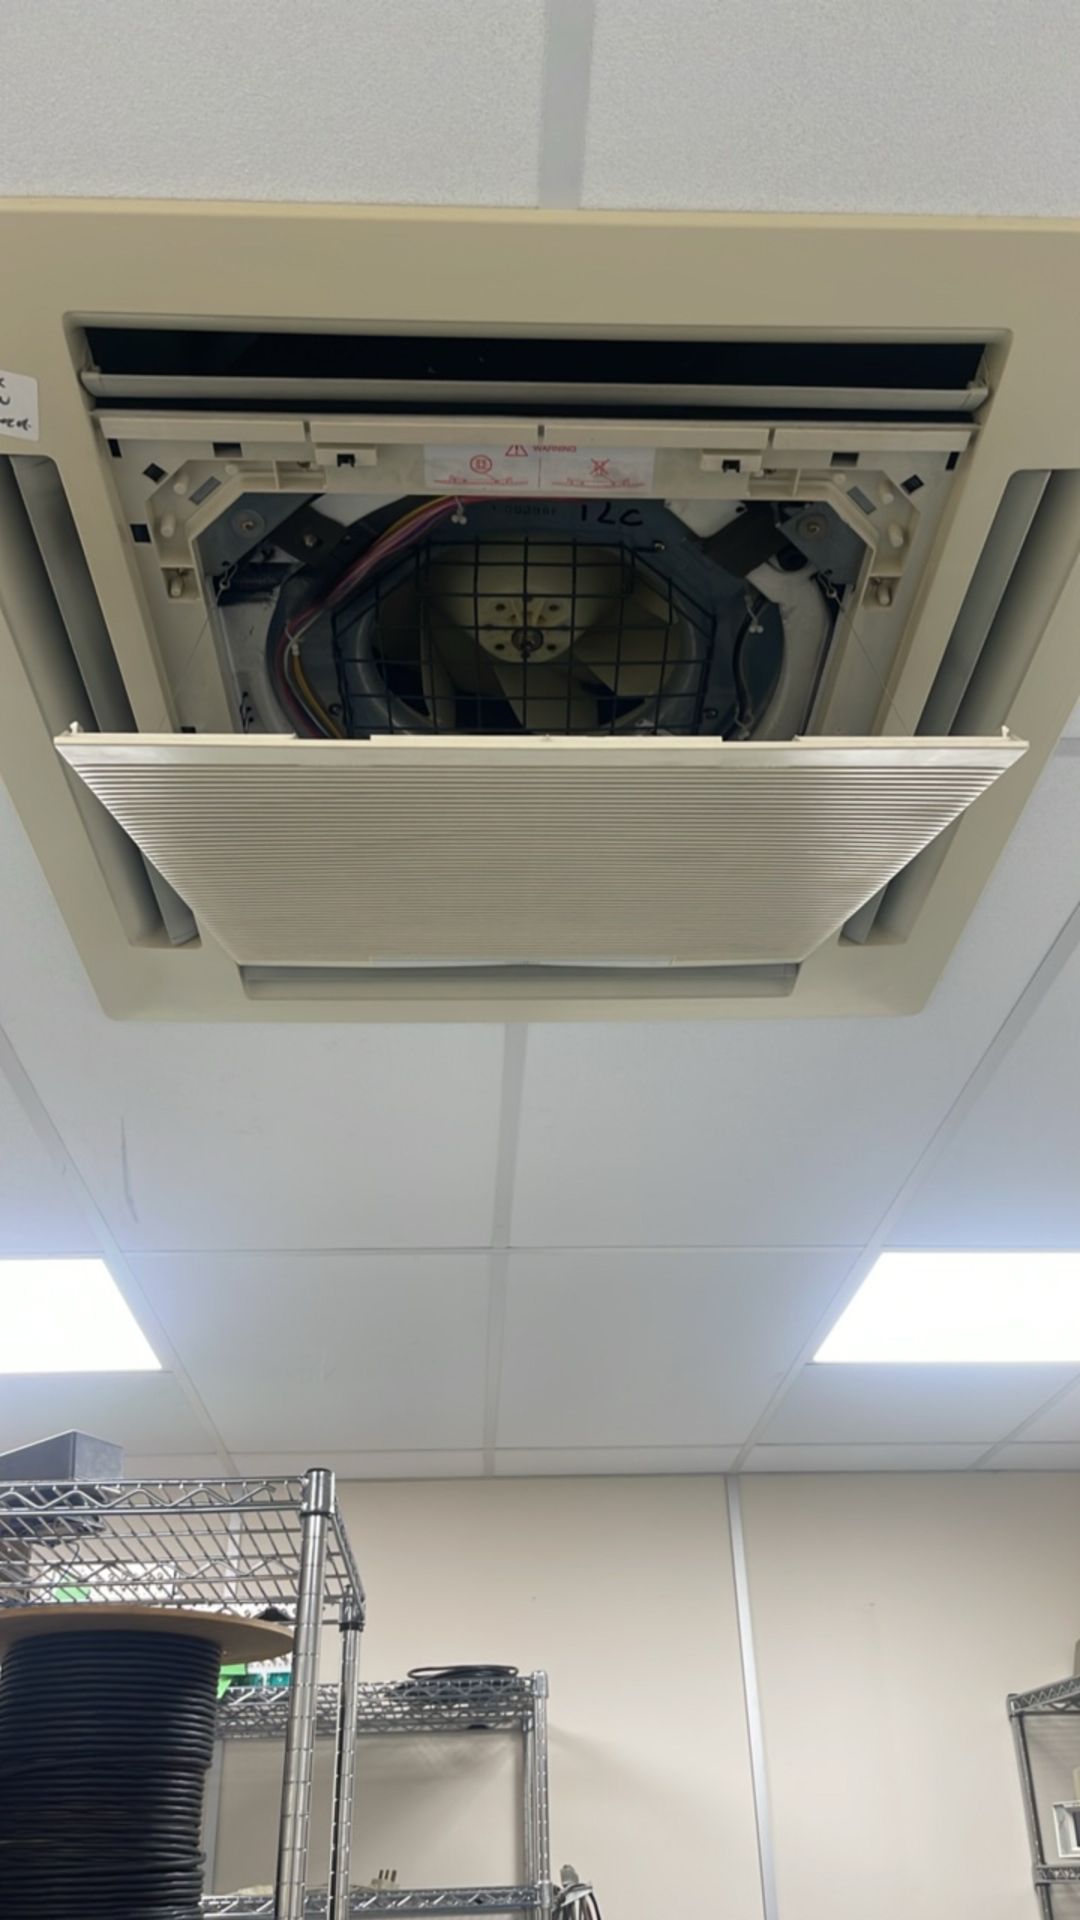 Fujitsu Air Conditioning Ceiling Cassette - Image 2 of 3